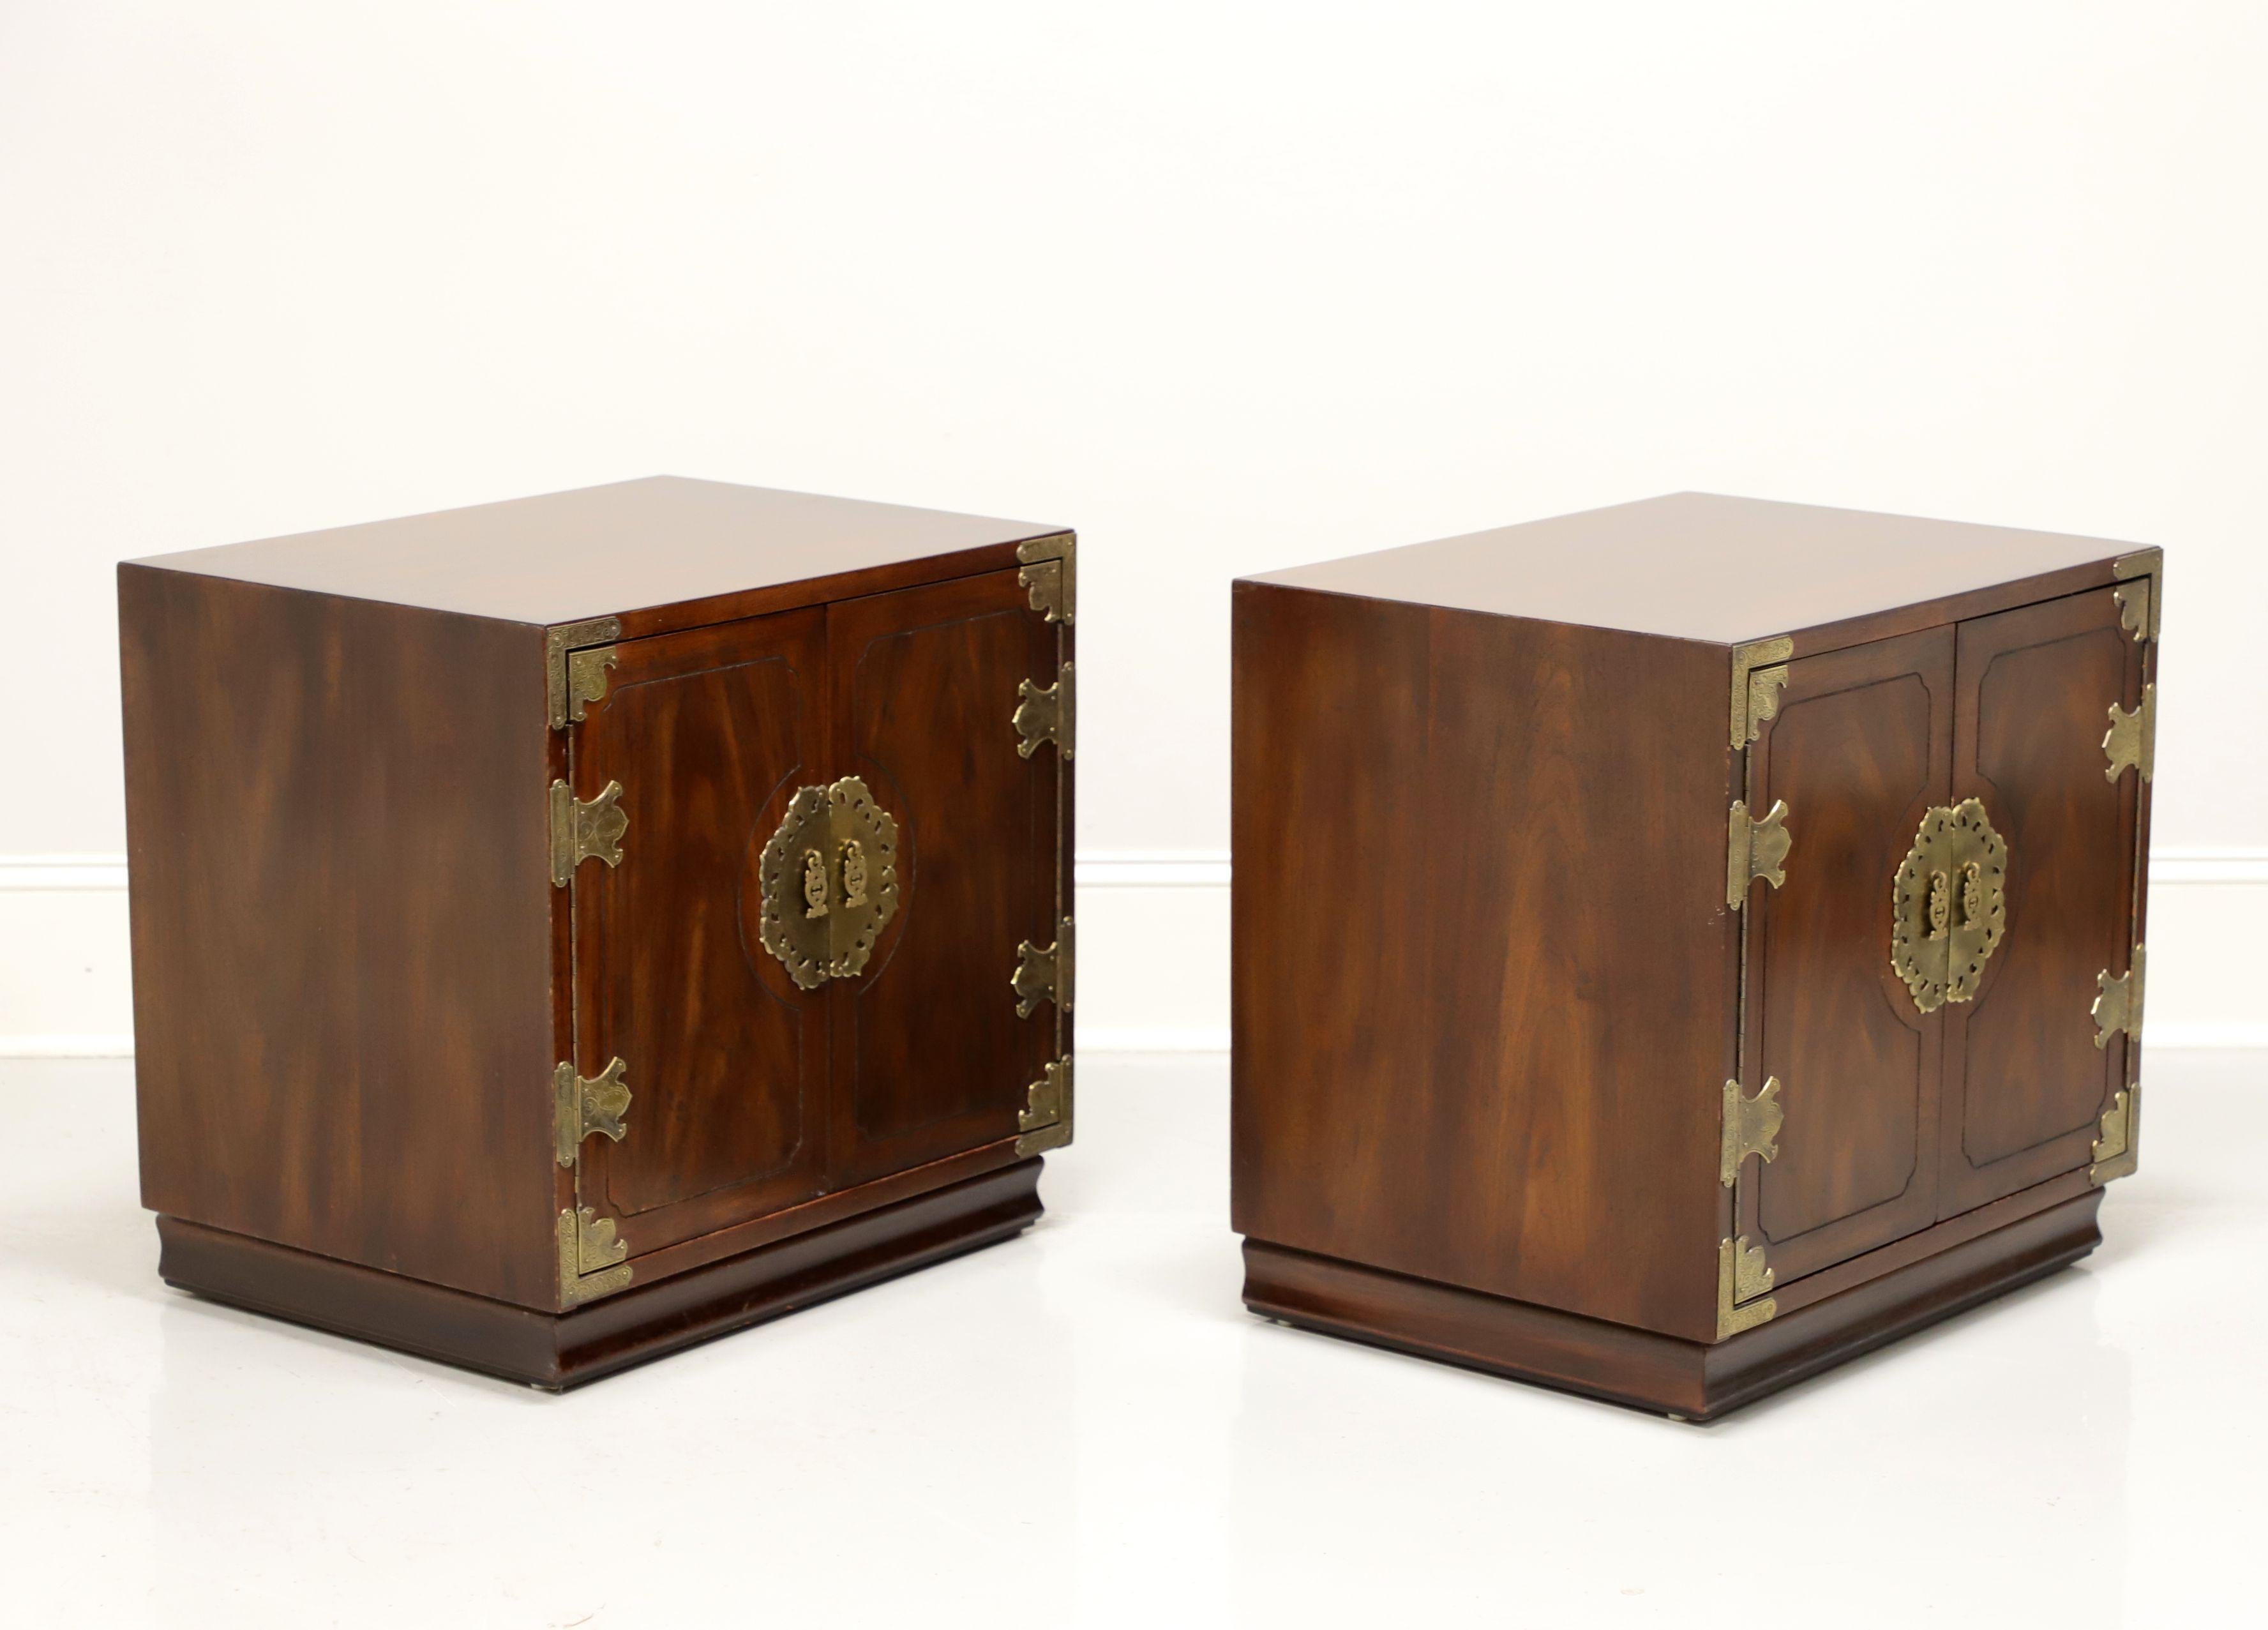 A pair of nightstands in the Japanese Tansu Campaign style by Henredon. Walnut with brass hardware and accents. Features dual doors revealing a storage area with one adjustable wood shelf. Made in Morganton, North Carolina, USA, circa